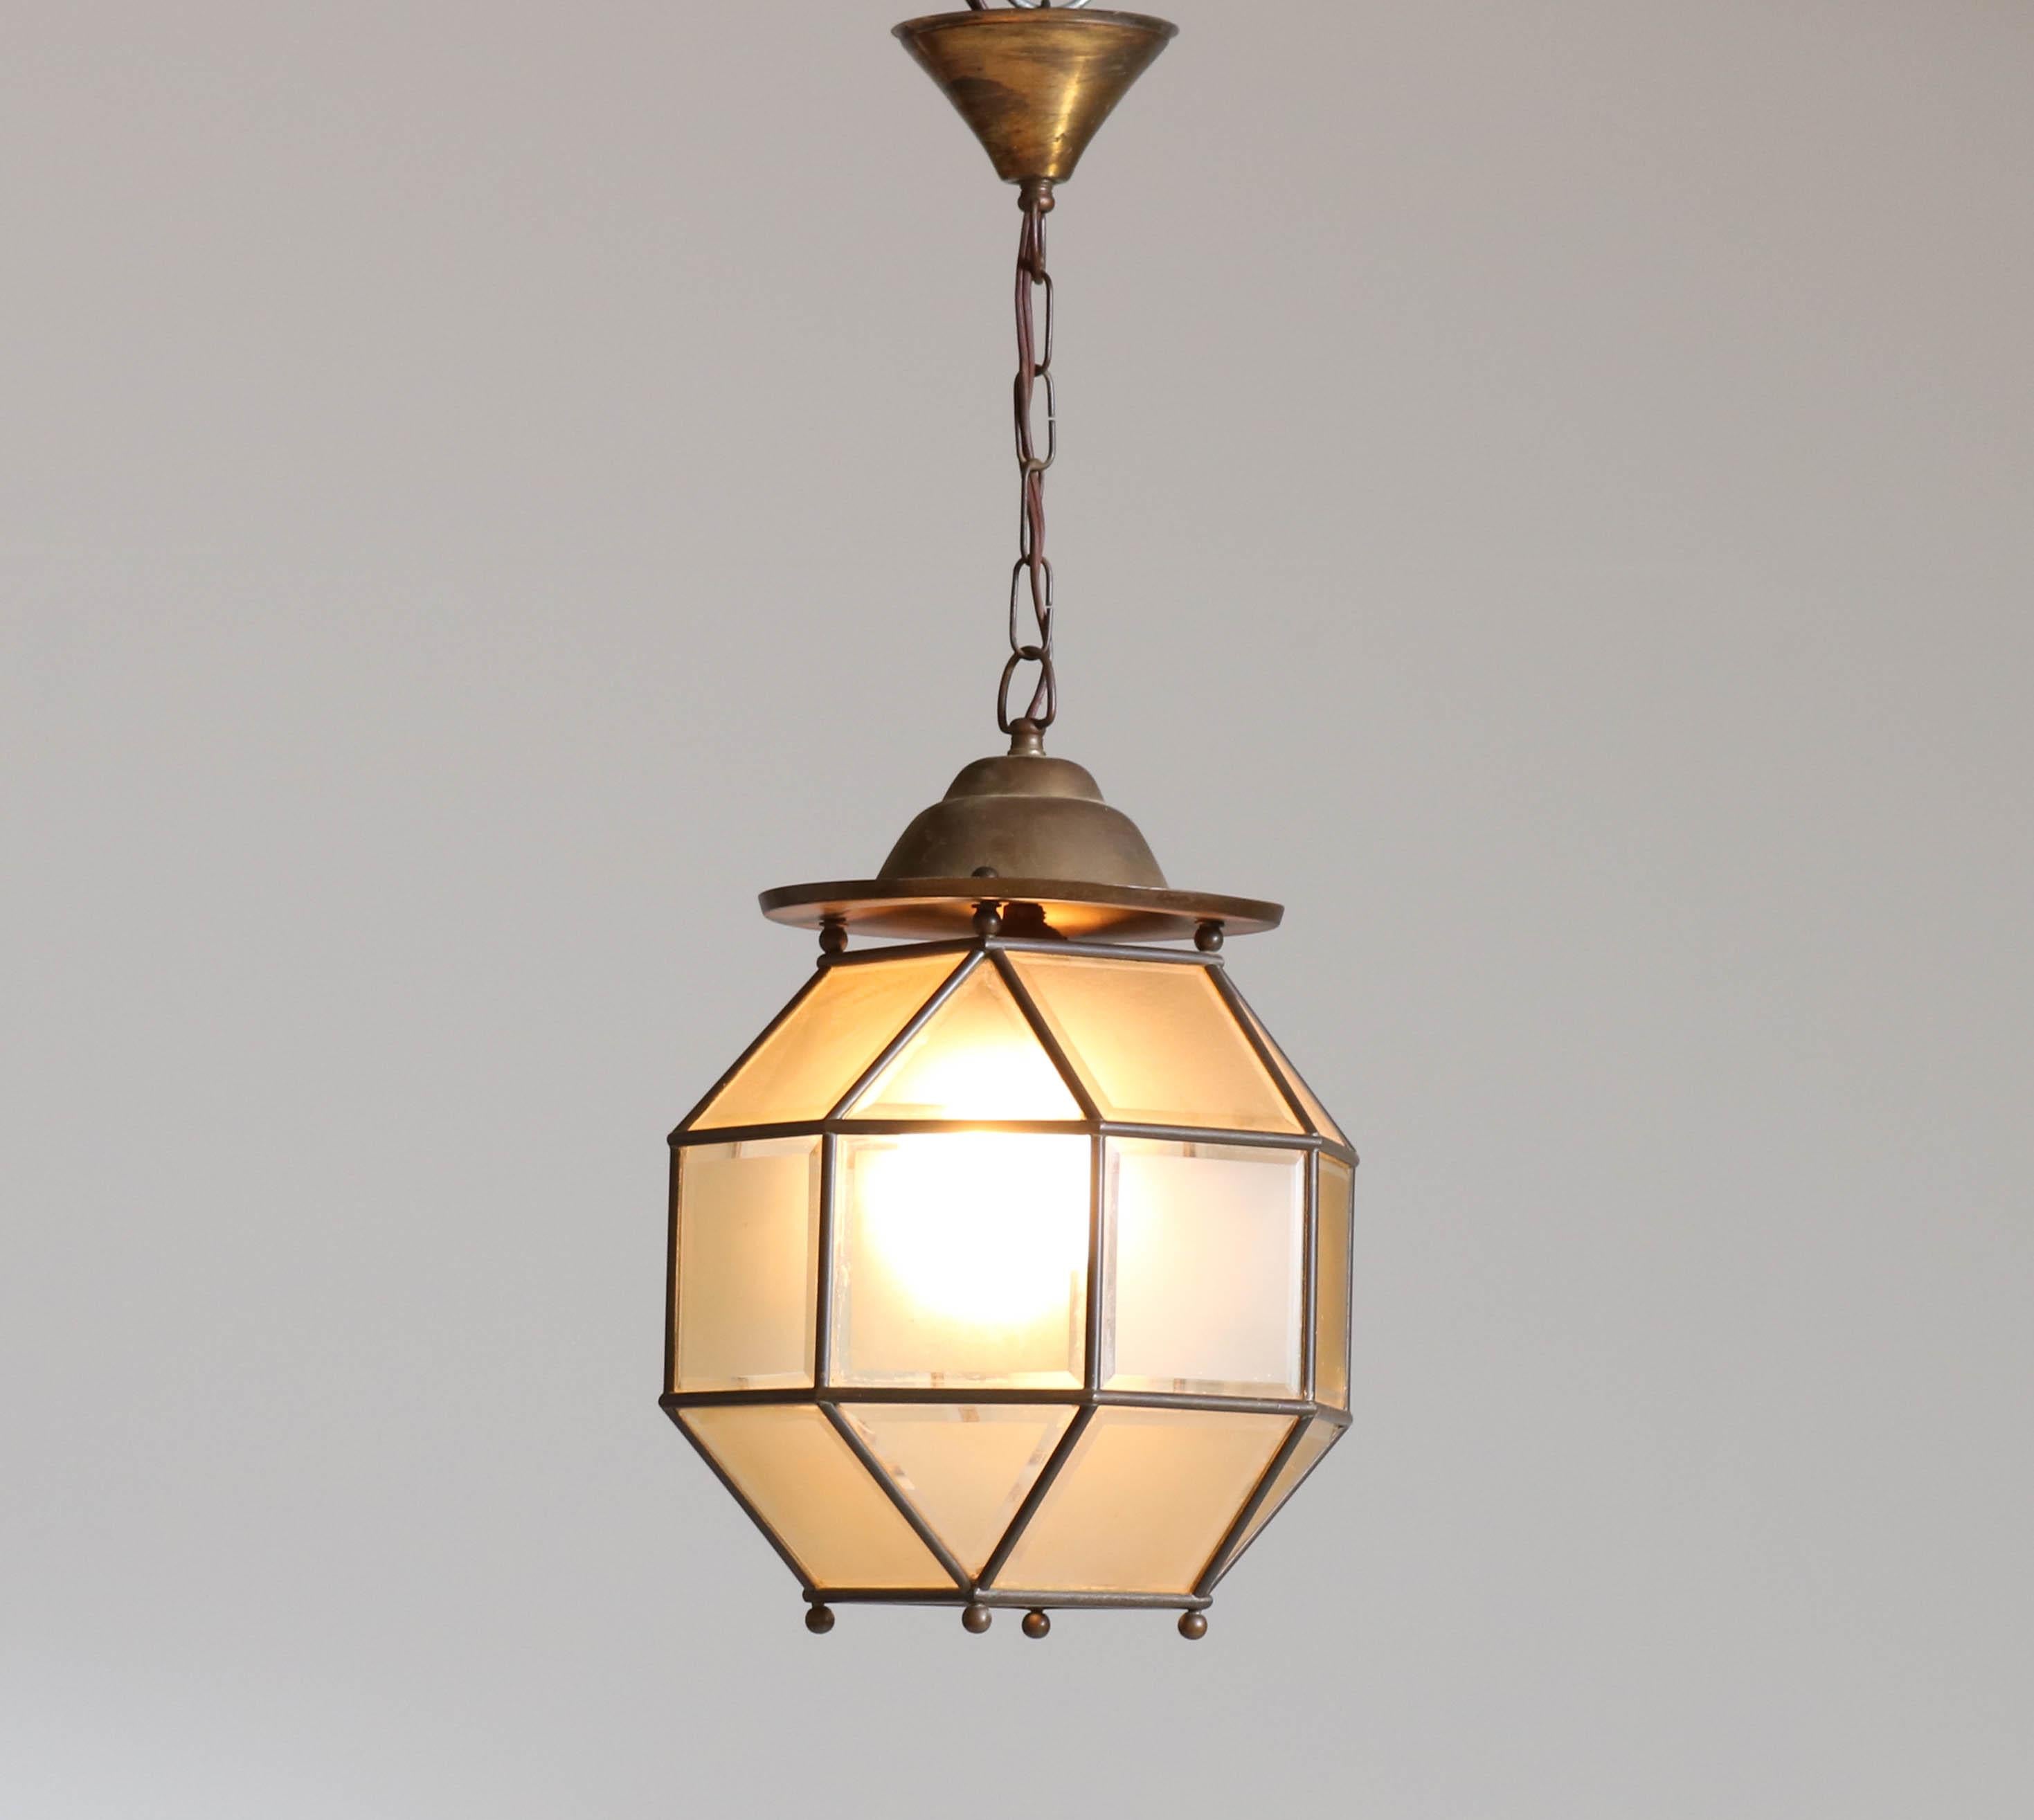 Wonderful Dutch Art Deco lantern.
Solid brass with original beveled glass.
All glass pieces are in good condition.
In good original condition with minor wear consistent with age and use,
preserving a beautiful patina.